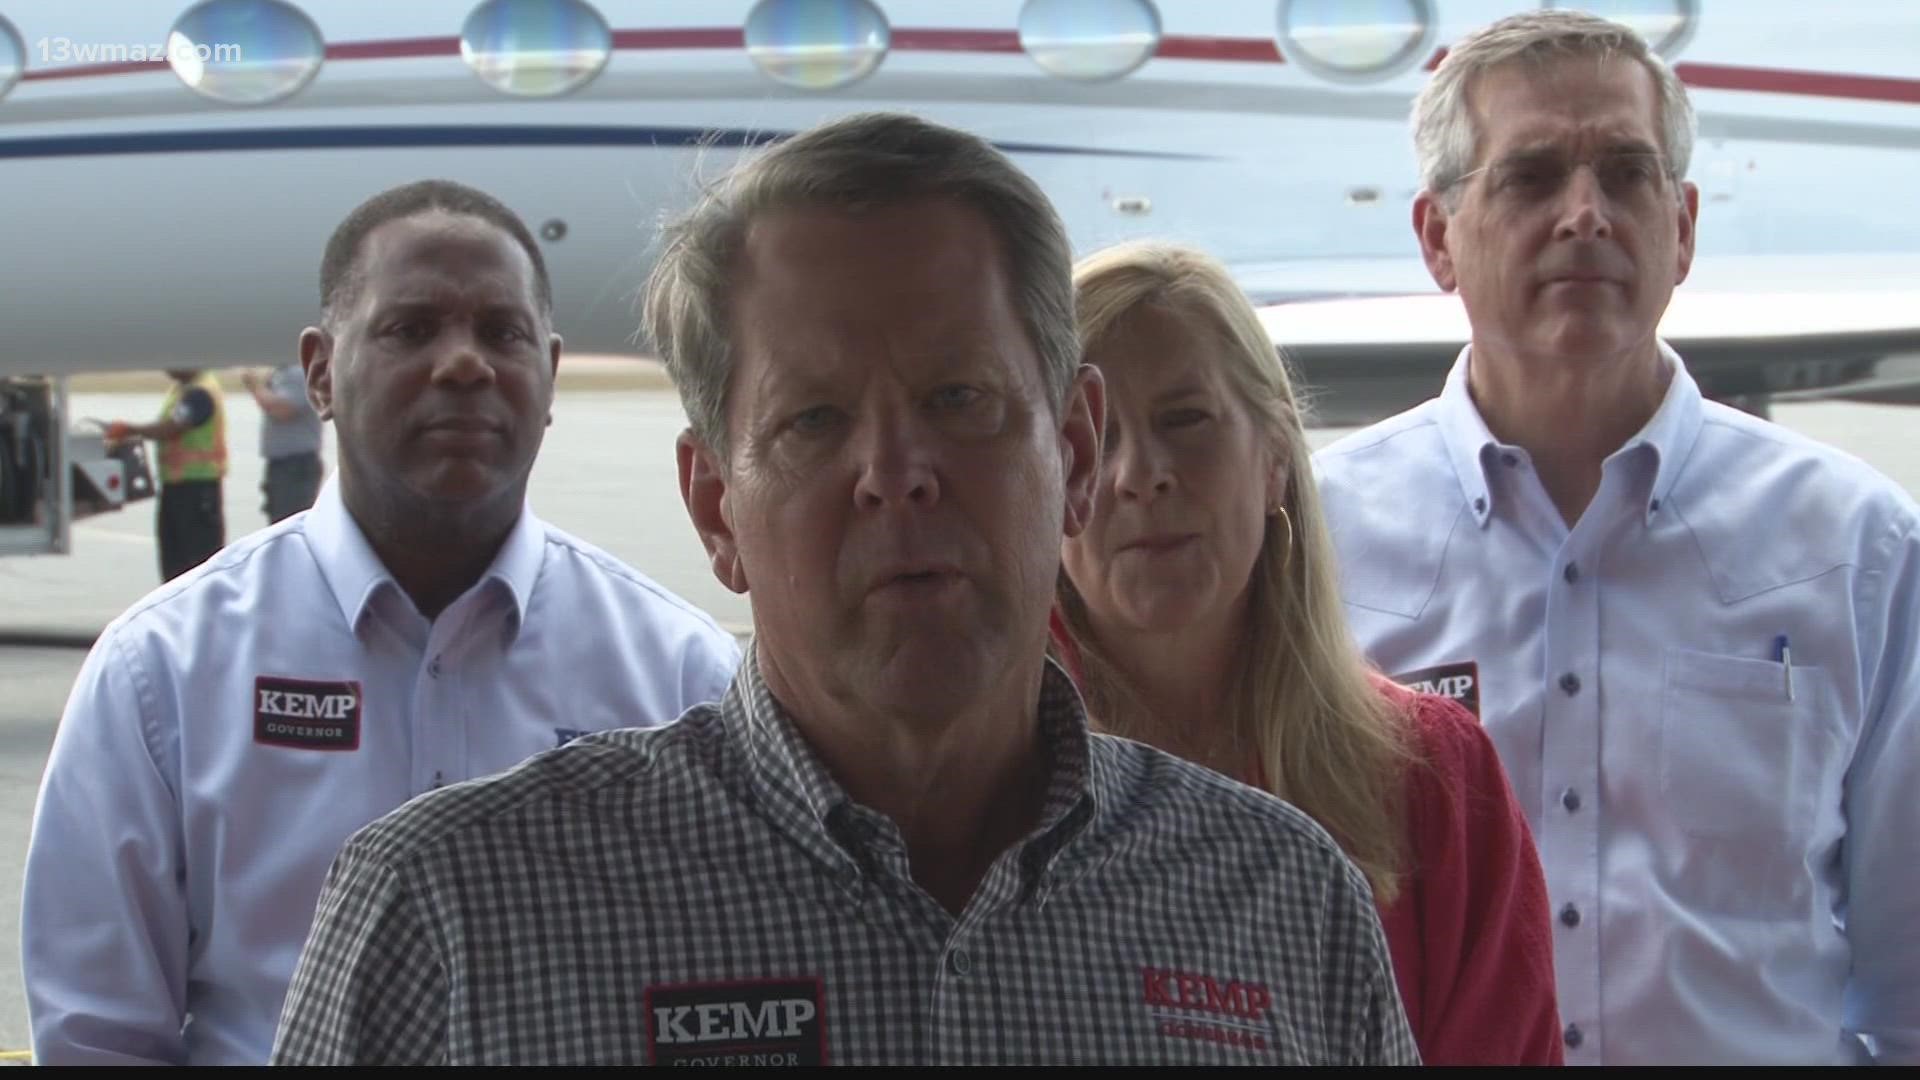 Kemp told voters if he is reelected, he'd use $1 billion of voter money for a tax rebate and $1 billion  for a one-time grant to help property owners